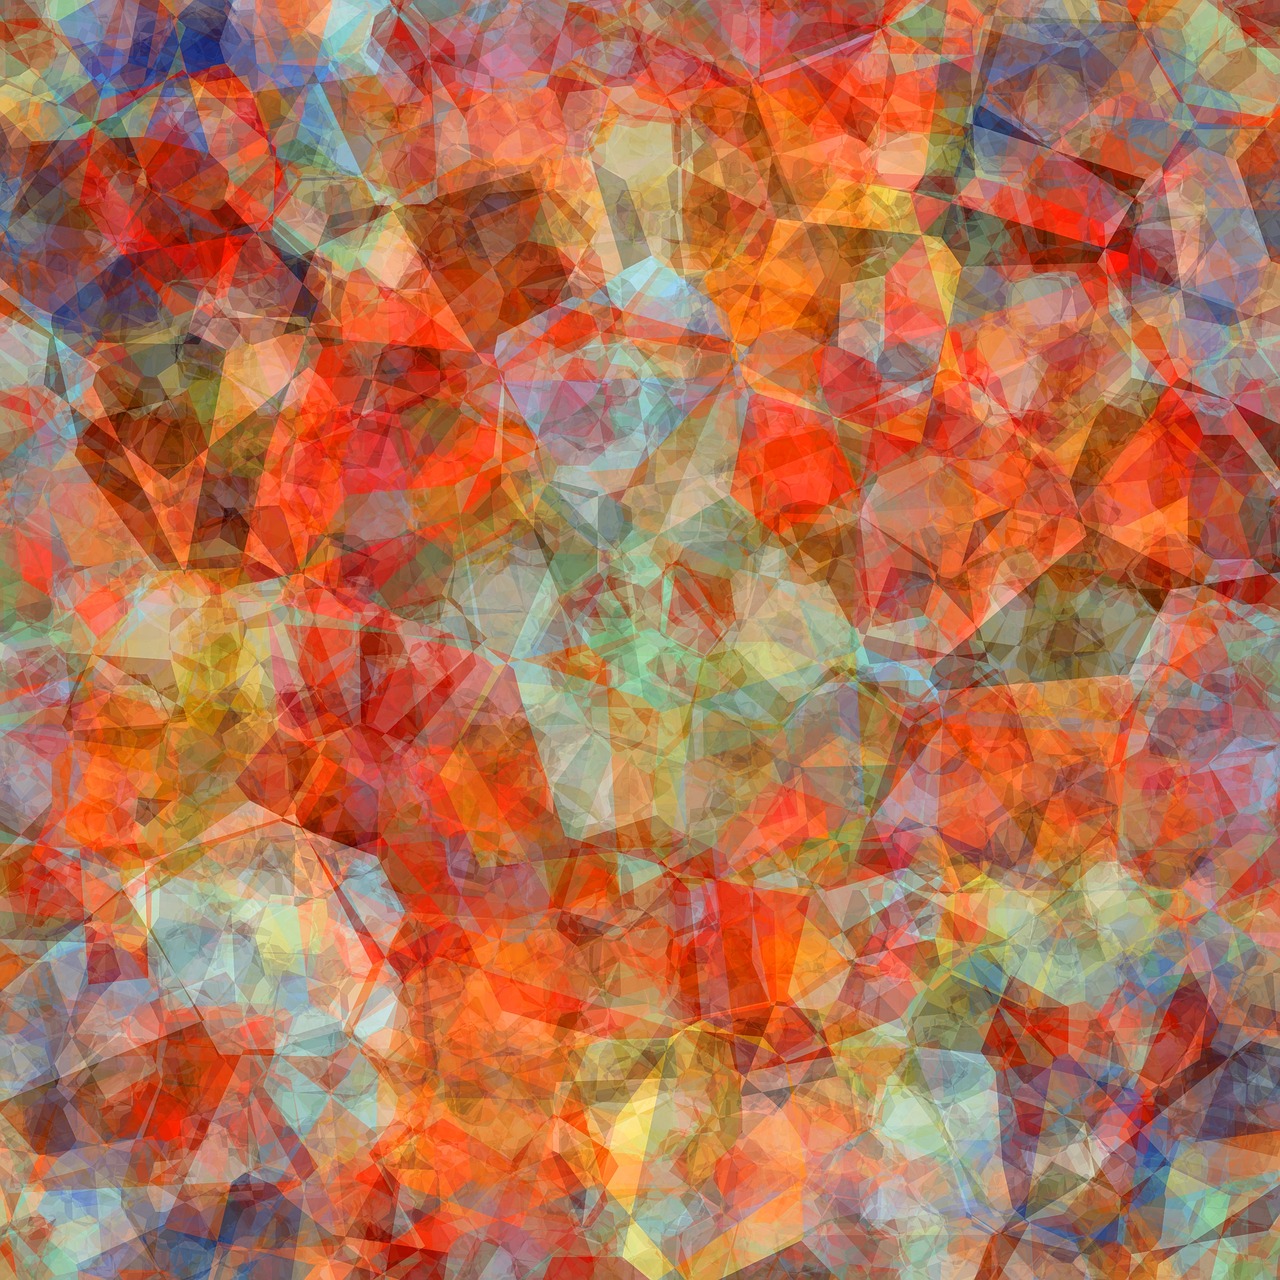 colorful abstract polygon free photo